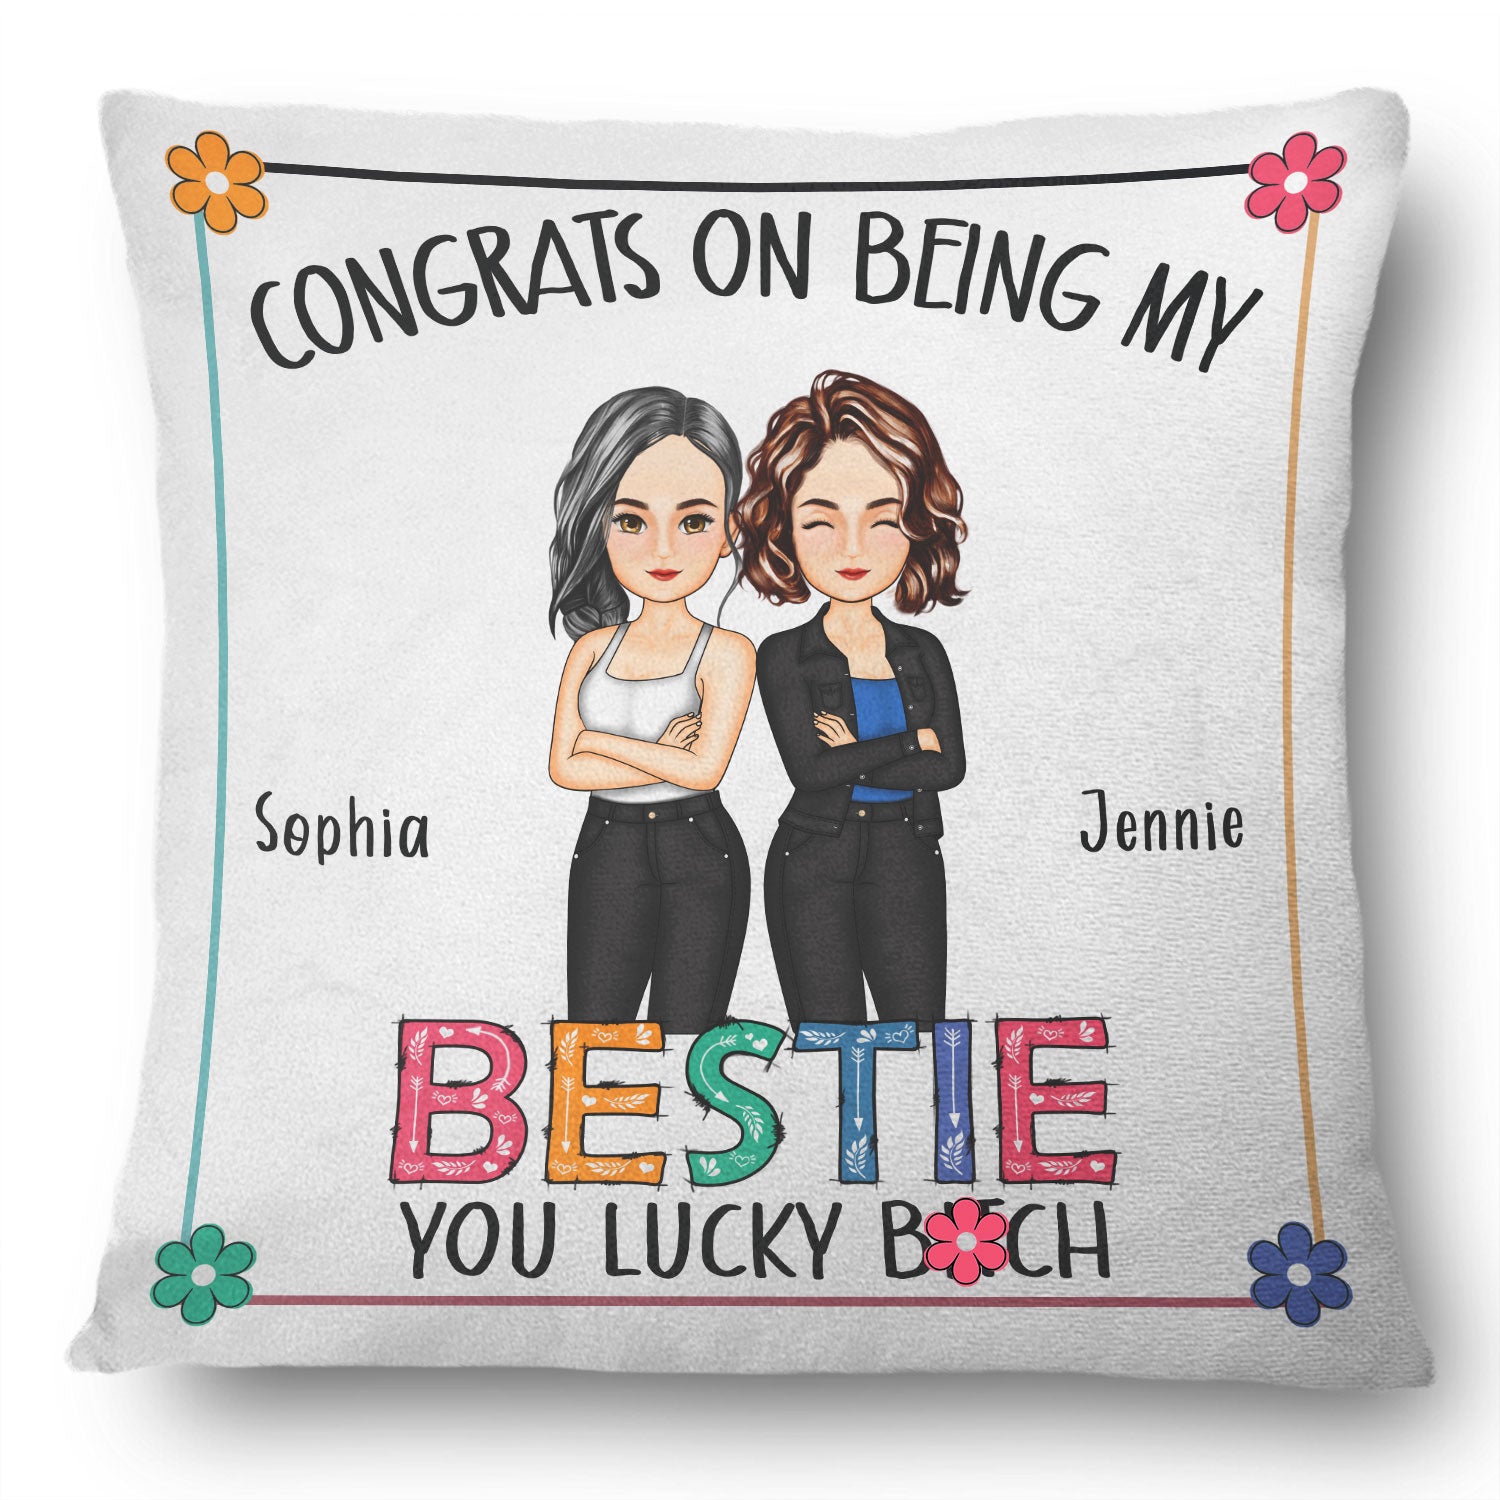 Congrats On Being My Bestie - Gift For Bestie - Personalized Pillow